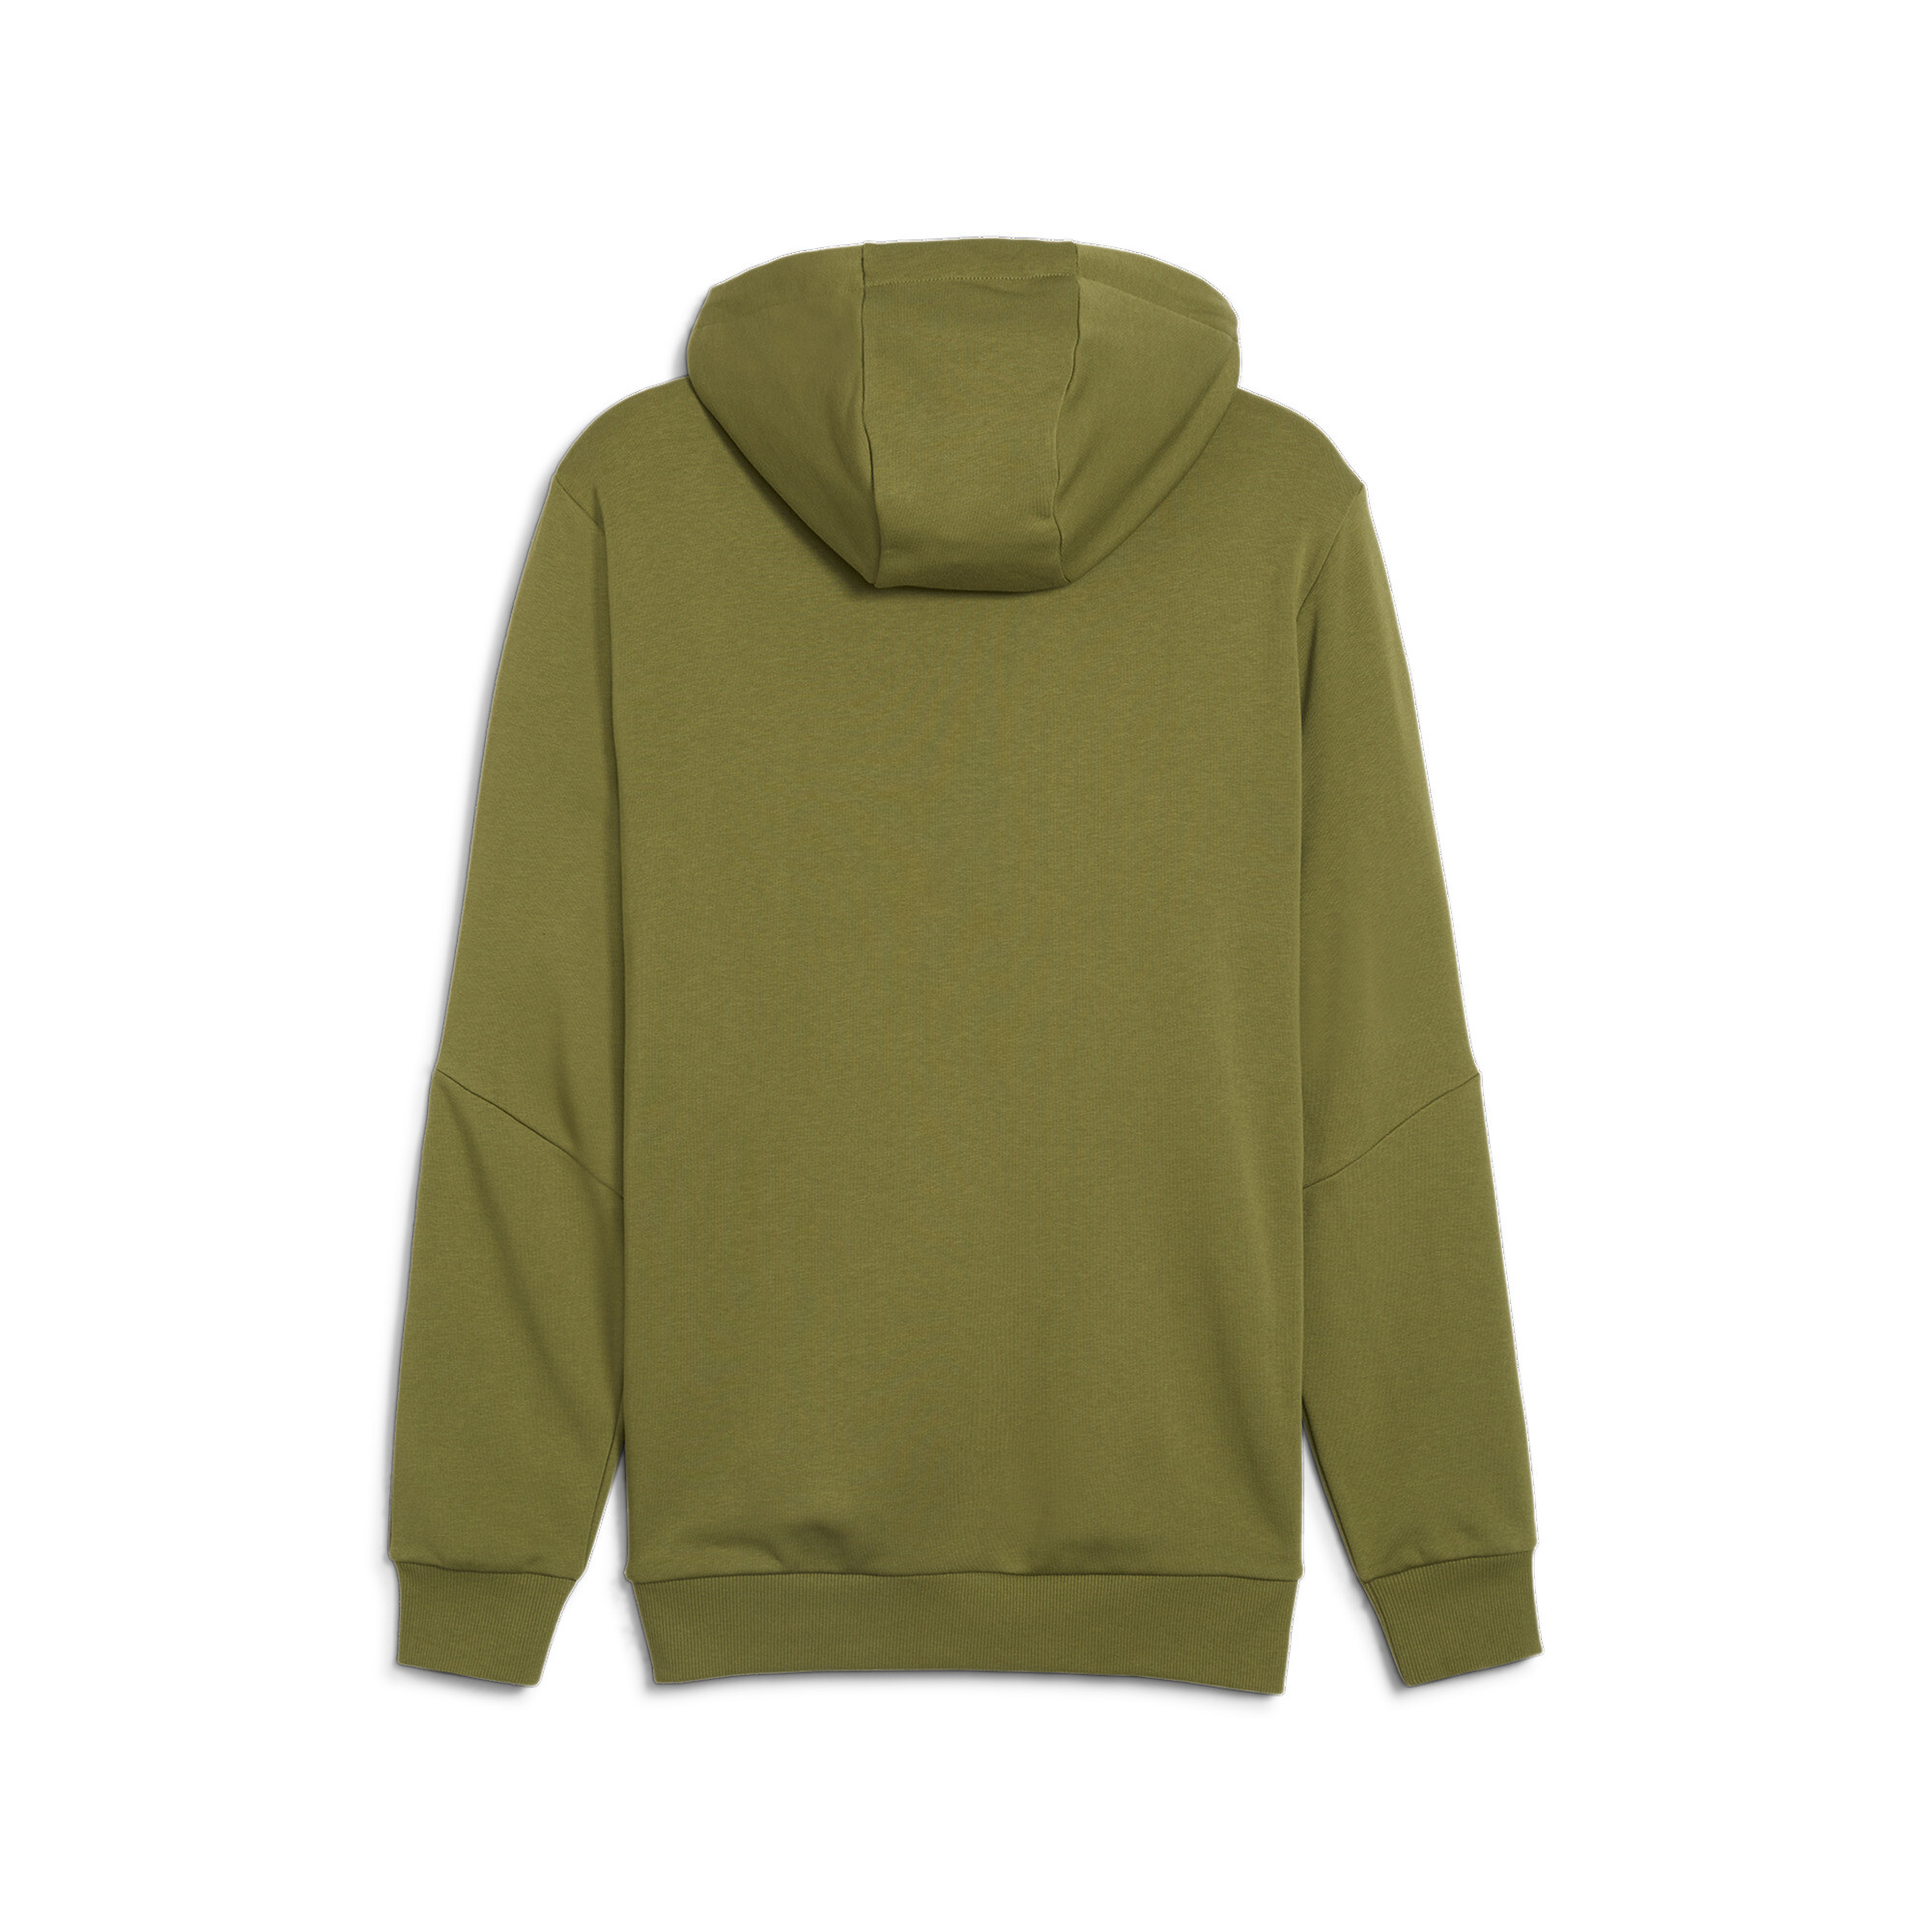 Men's Puma Essentials+ Tape's Hoodie, Green, Size S, Clothing